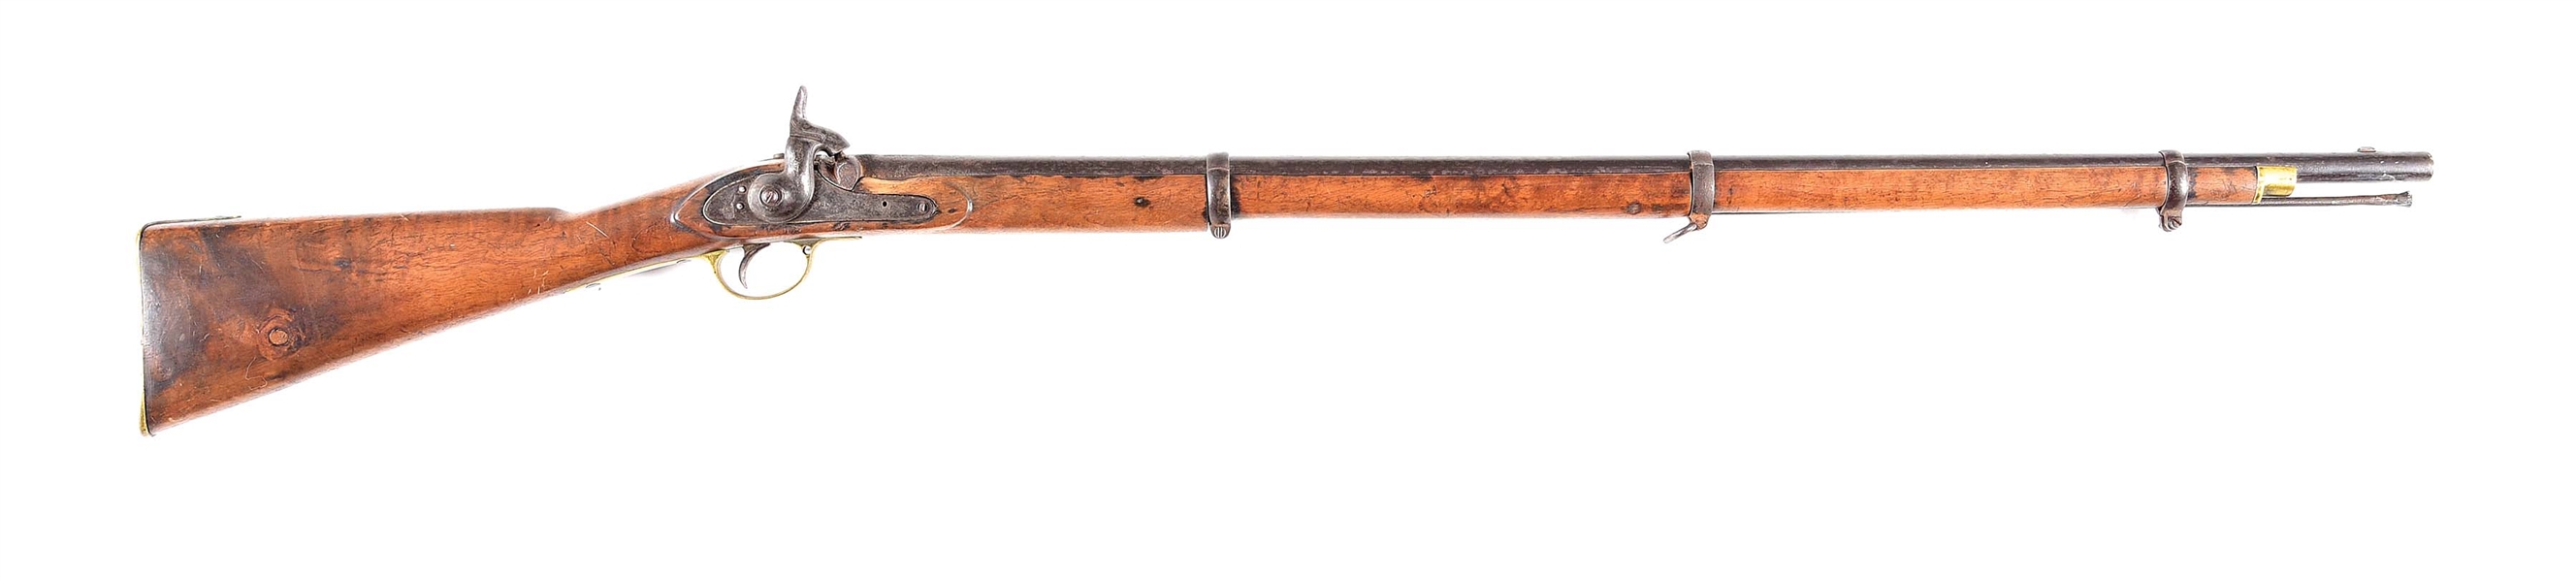 (A) MOORE AMERICAN MADE ENFIELD PERCUSSION RIFLE.